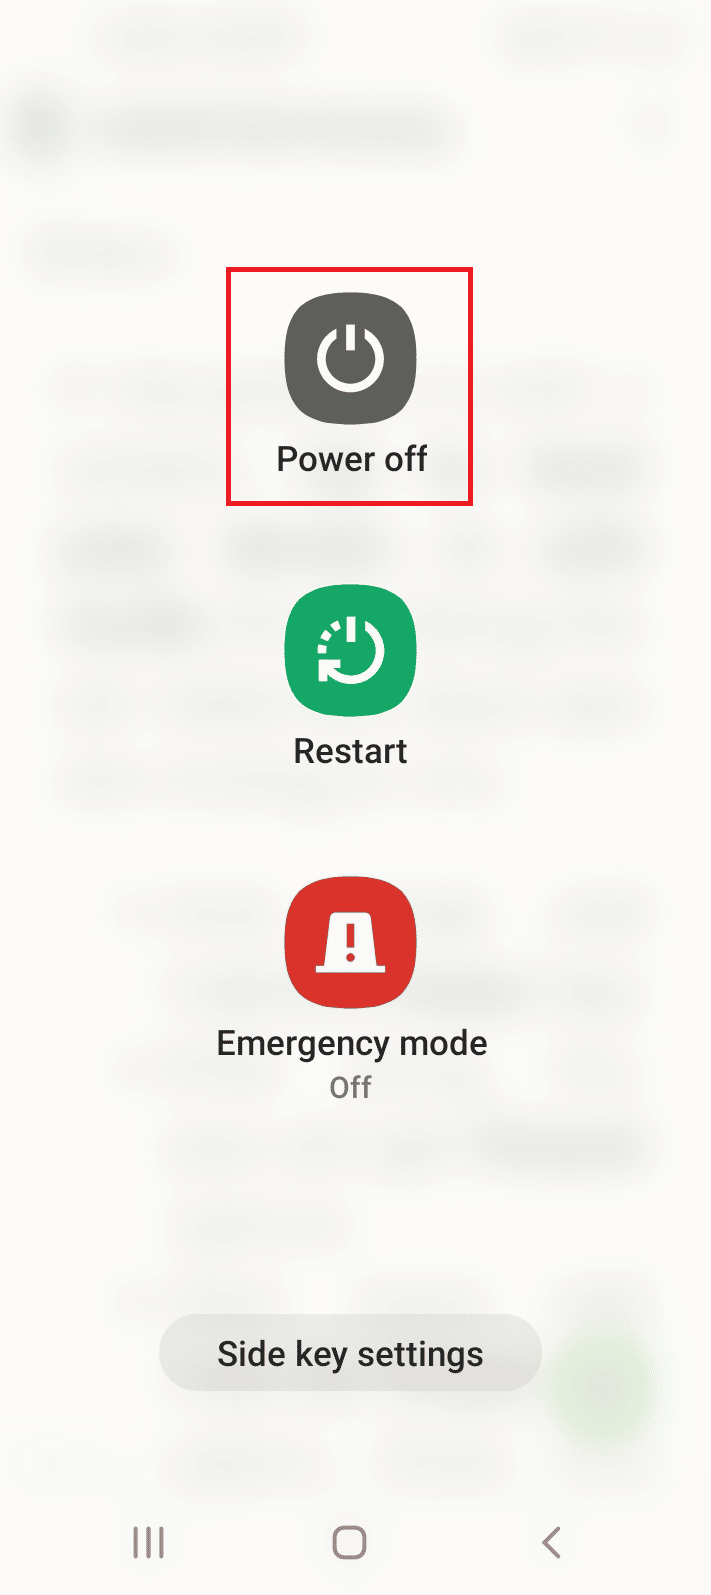 tap on the Power off option